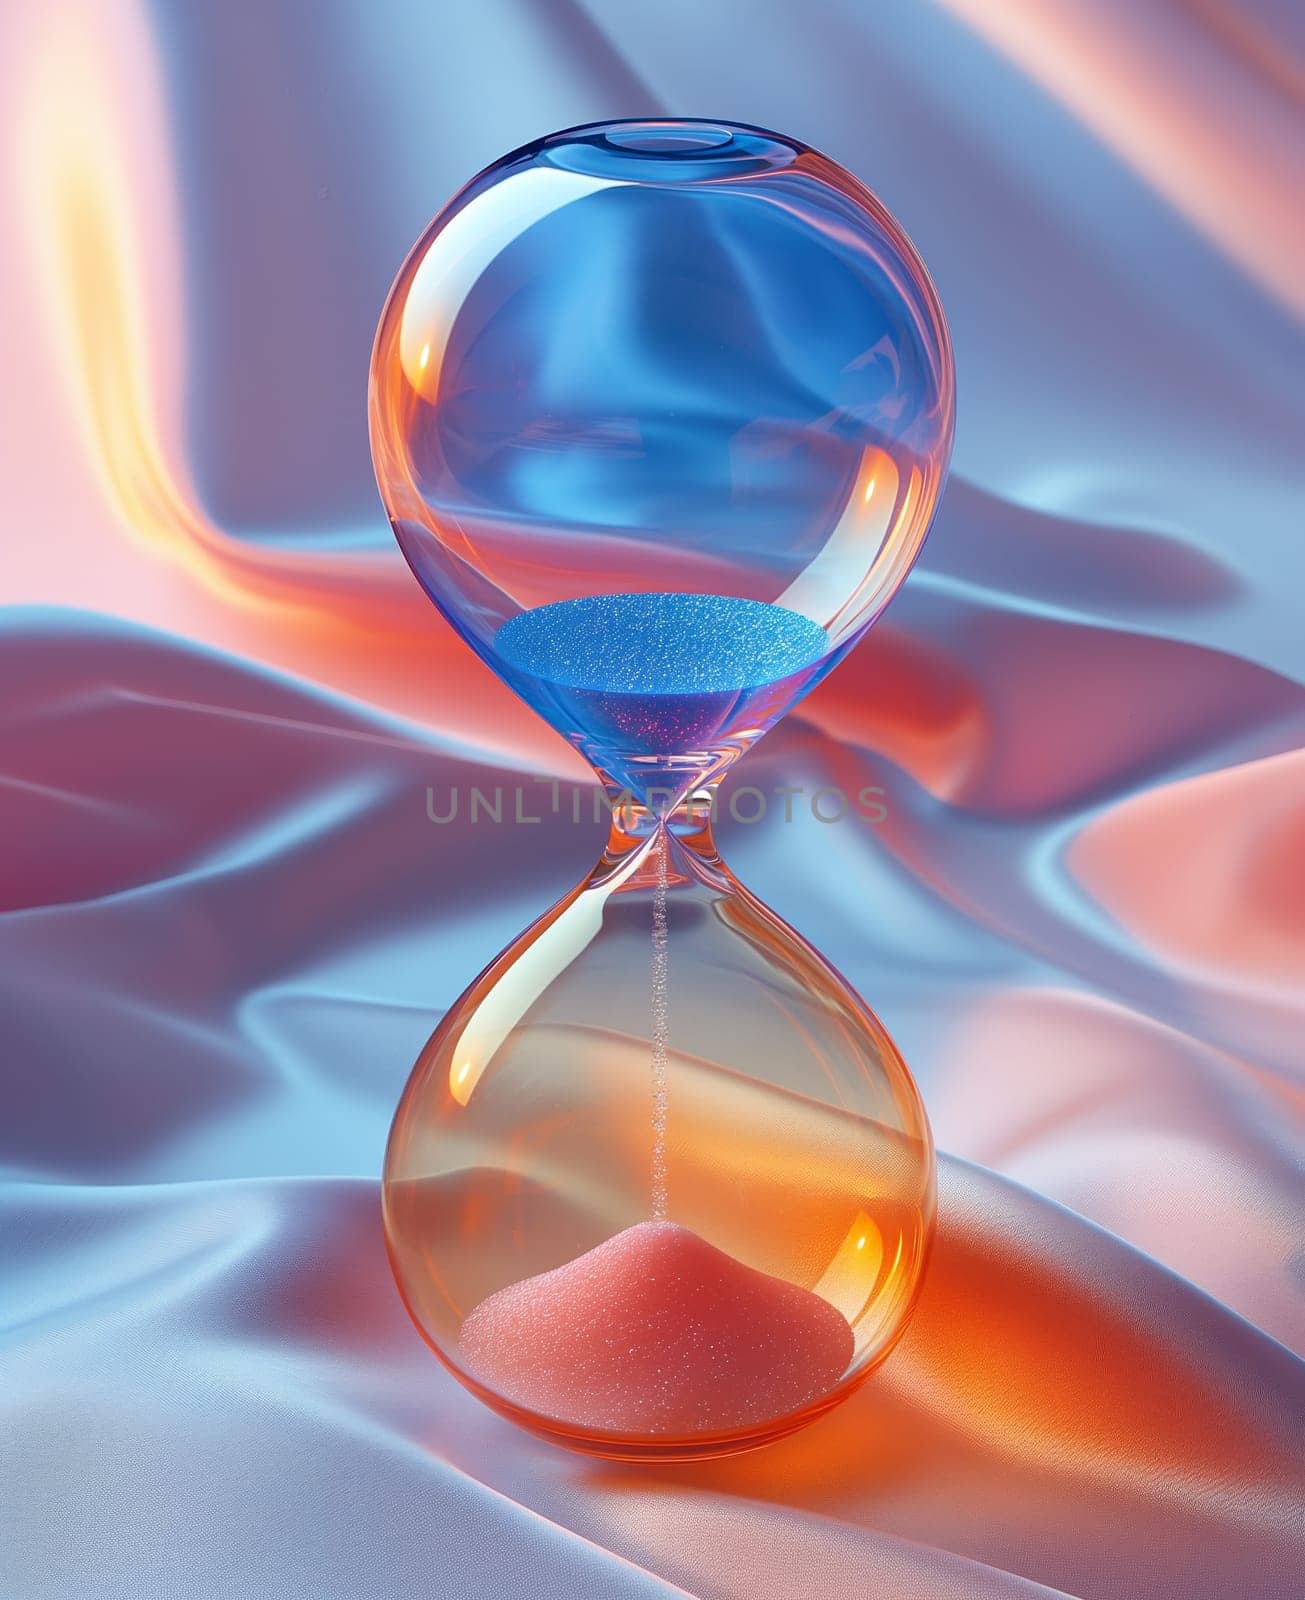 Hourglass showing time on colorful abstract background. Selective focus.